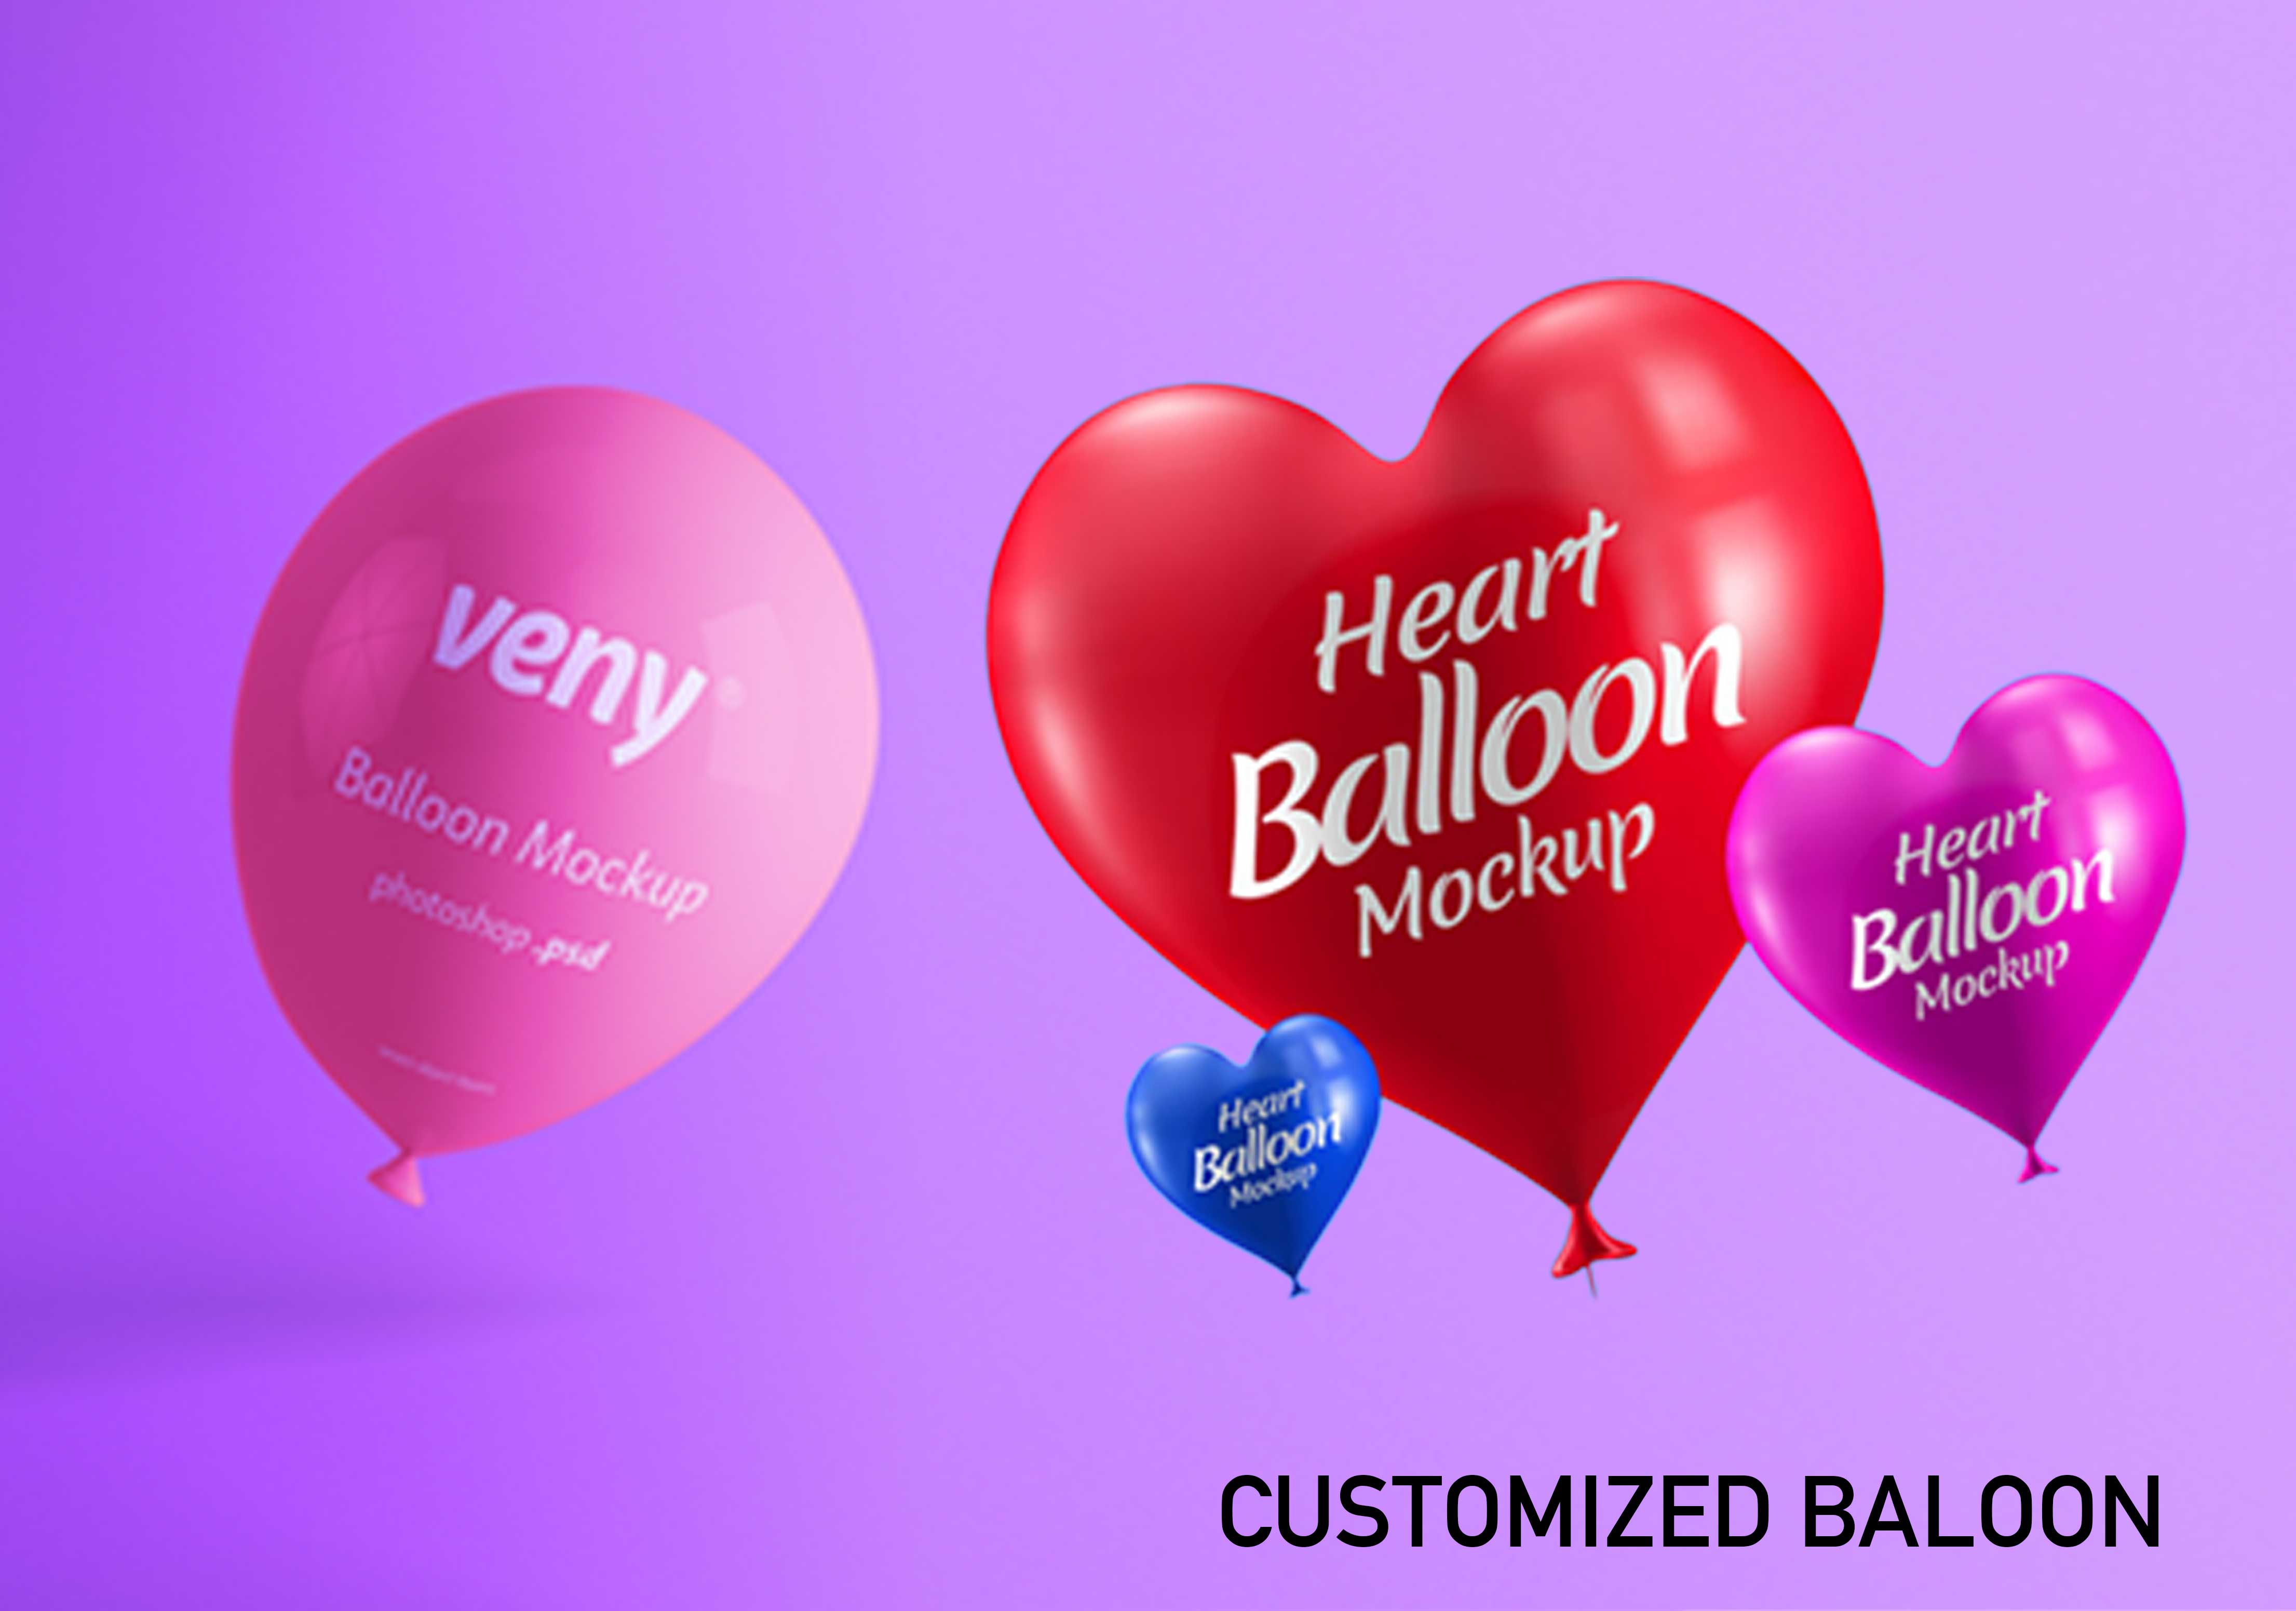 Customized balloons at Golden Point adds 